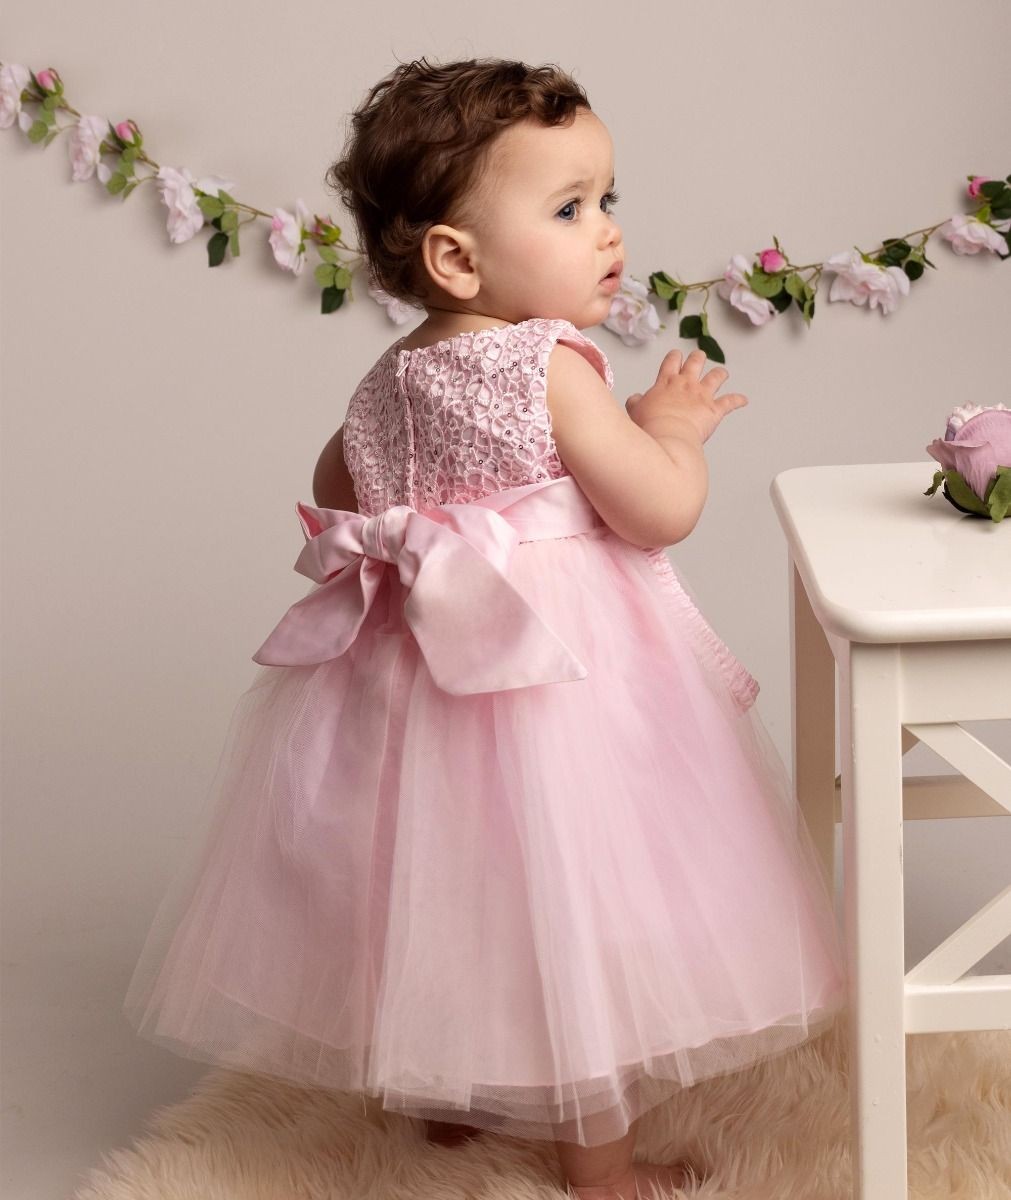 Baby Girls Dress with Floral Bodice & Bow - PC-1025 - Pink